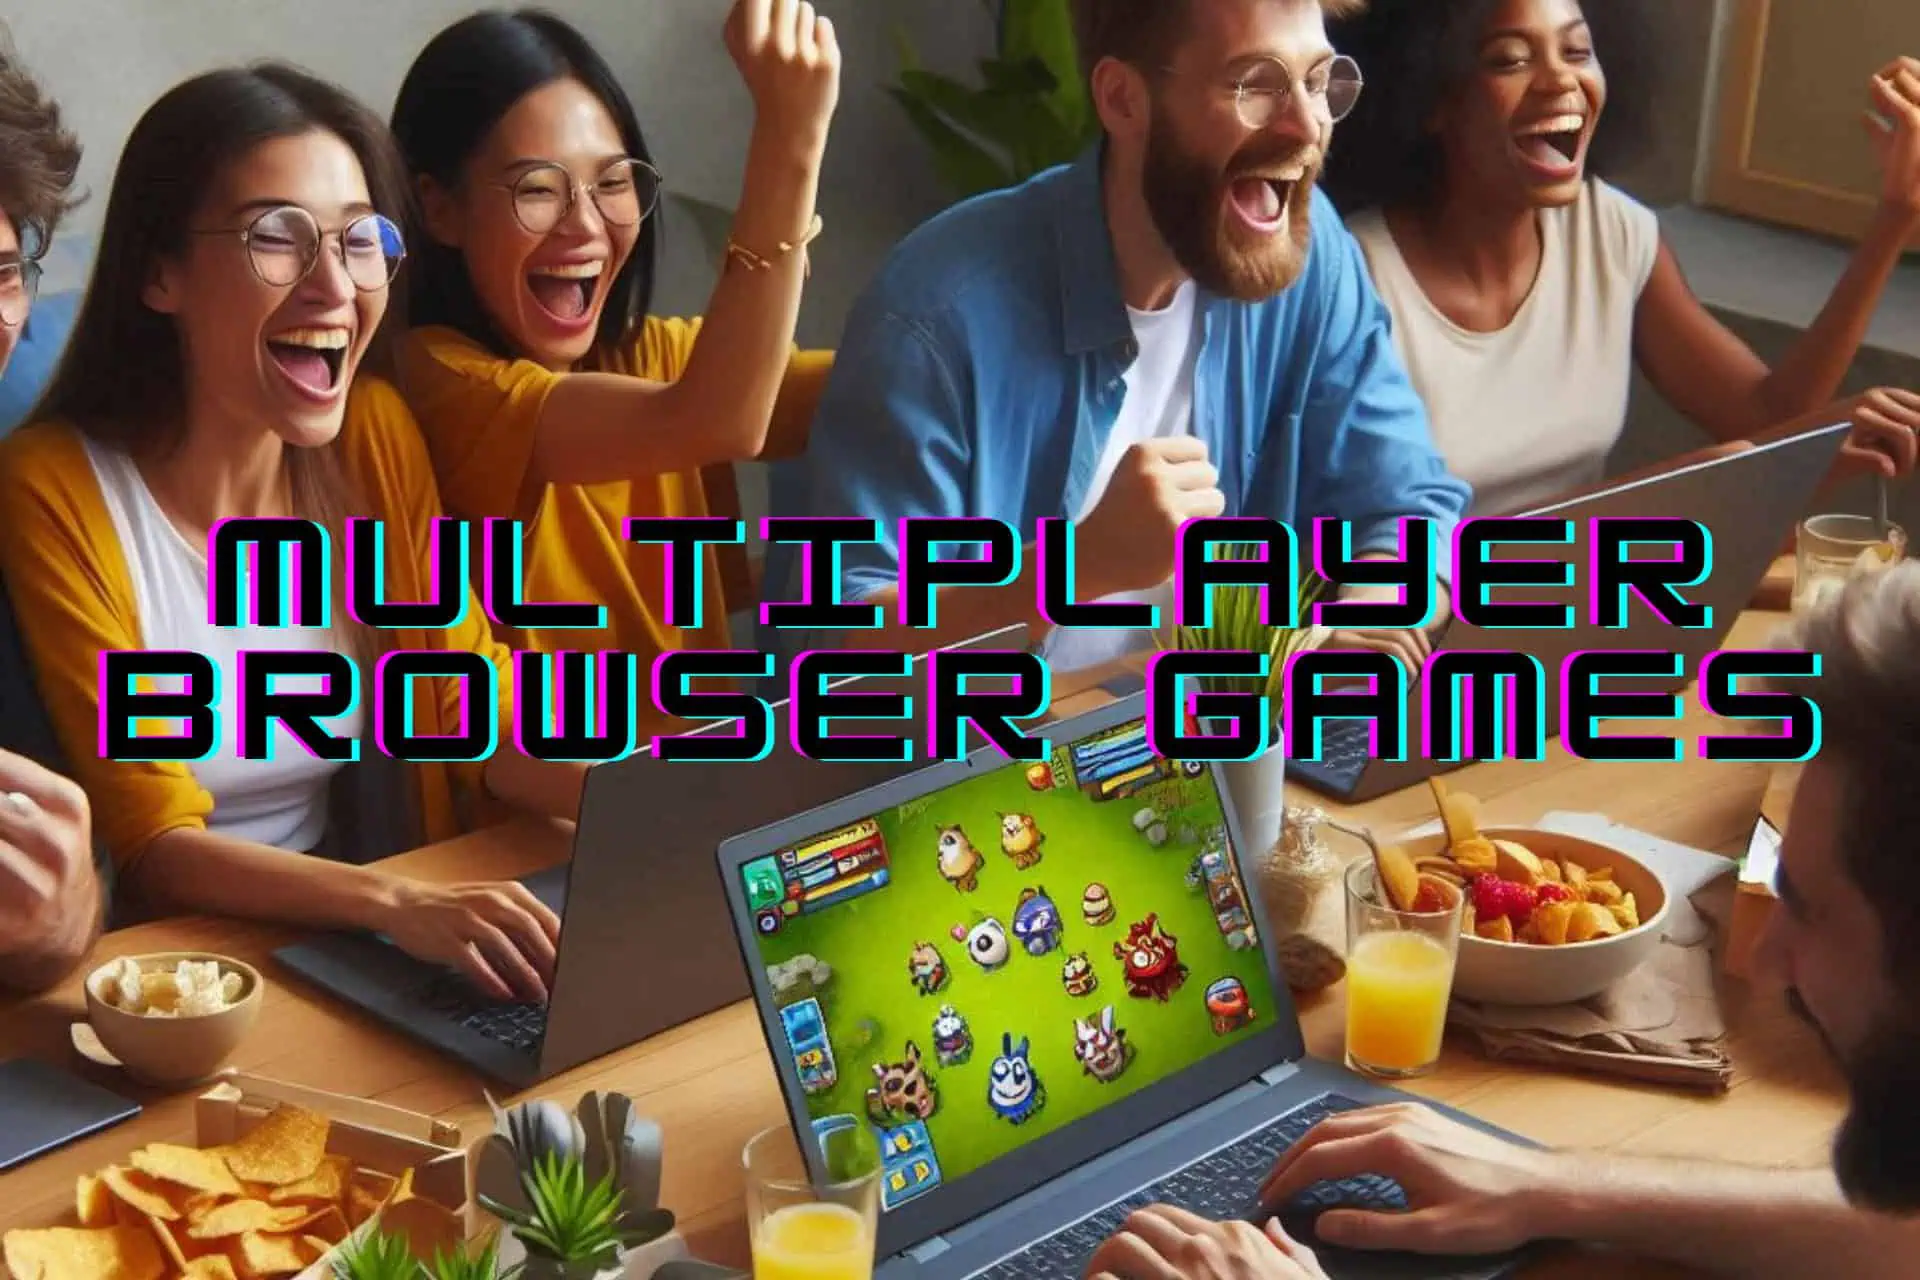 Multiplayer-Browsergames